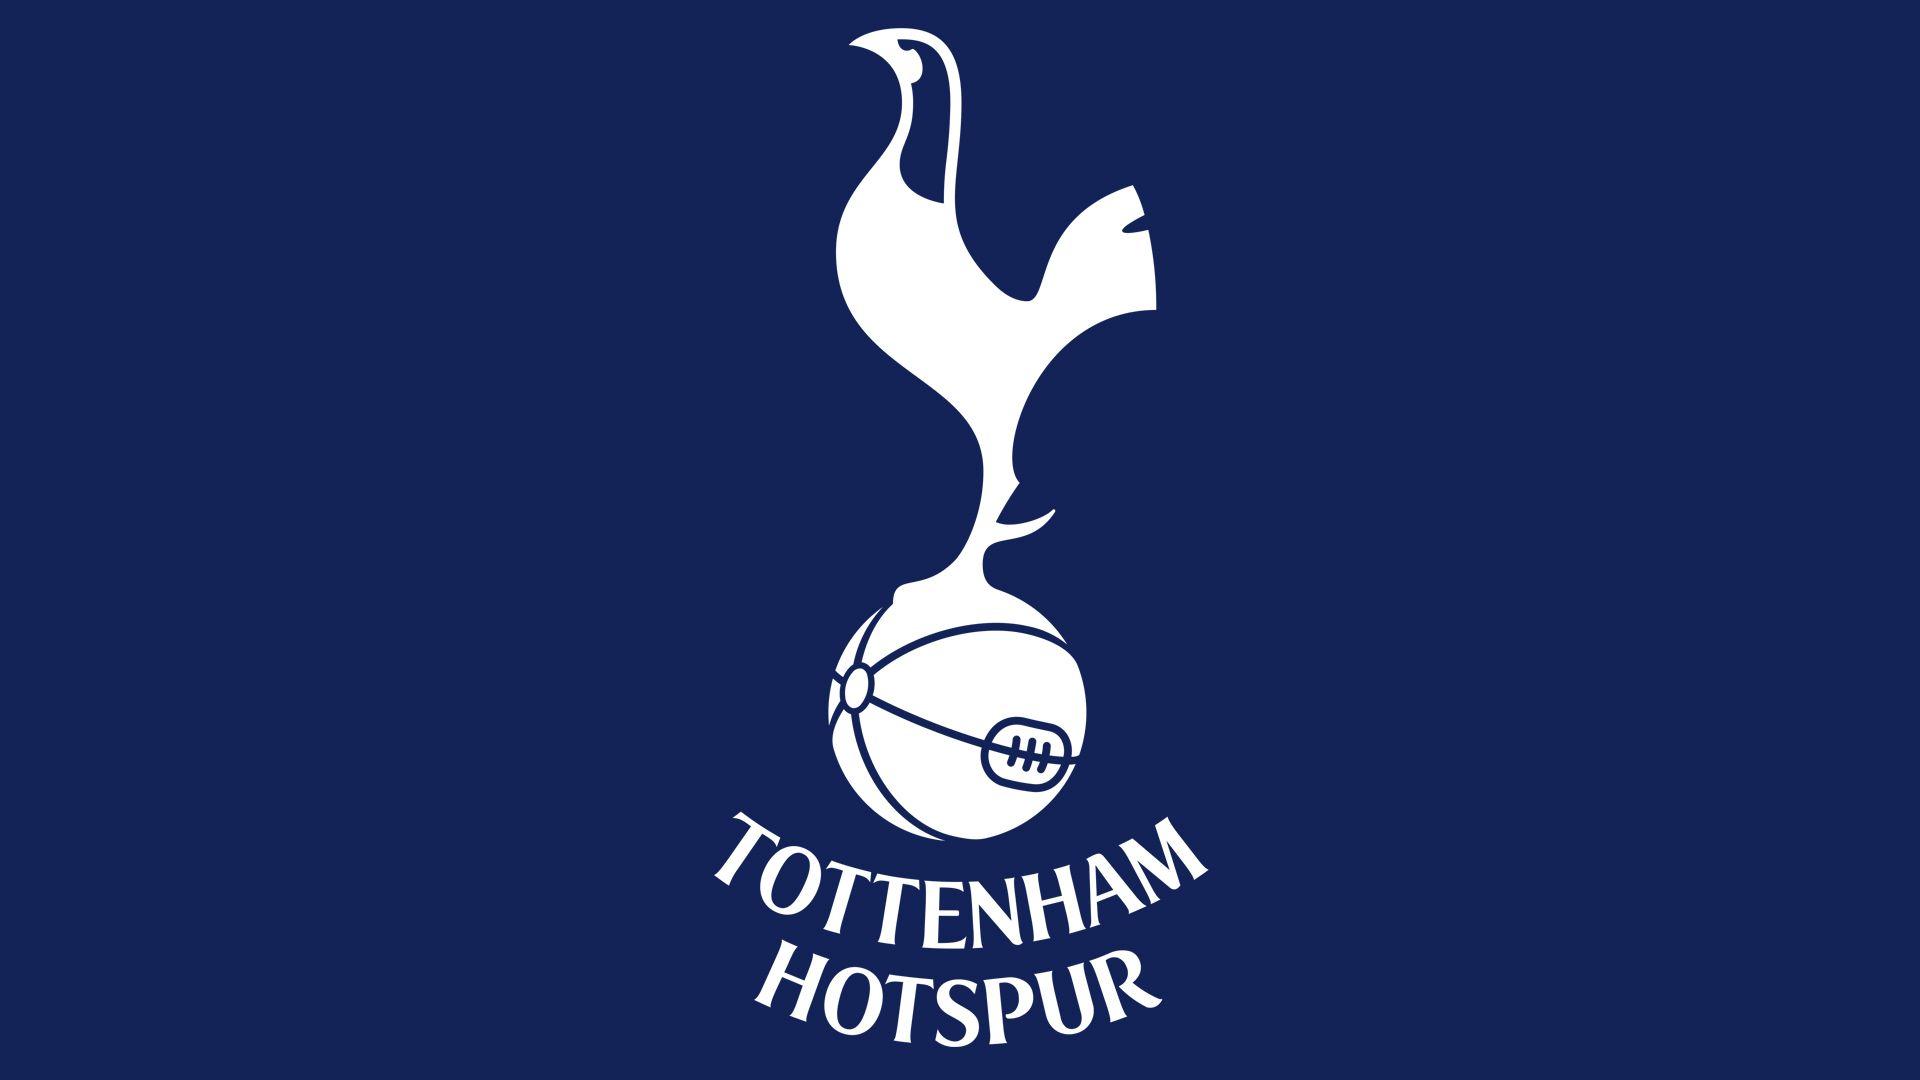 Tottenham Hotspur Logo - Tottenham Hotspur Logo, Tottenham Hotspur Symbol, Meaning, History